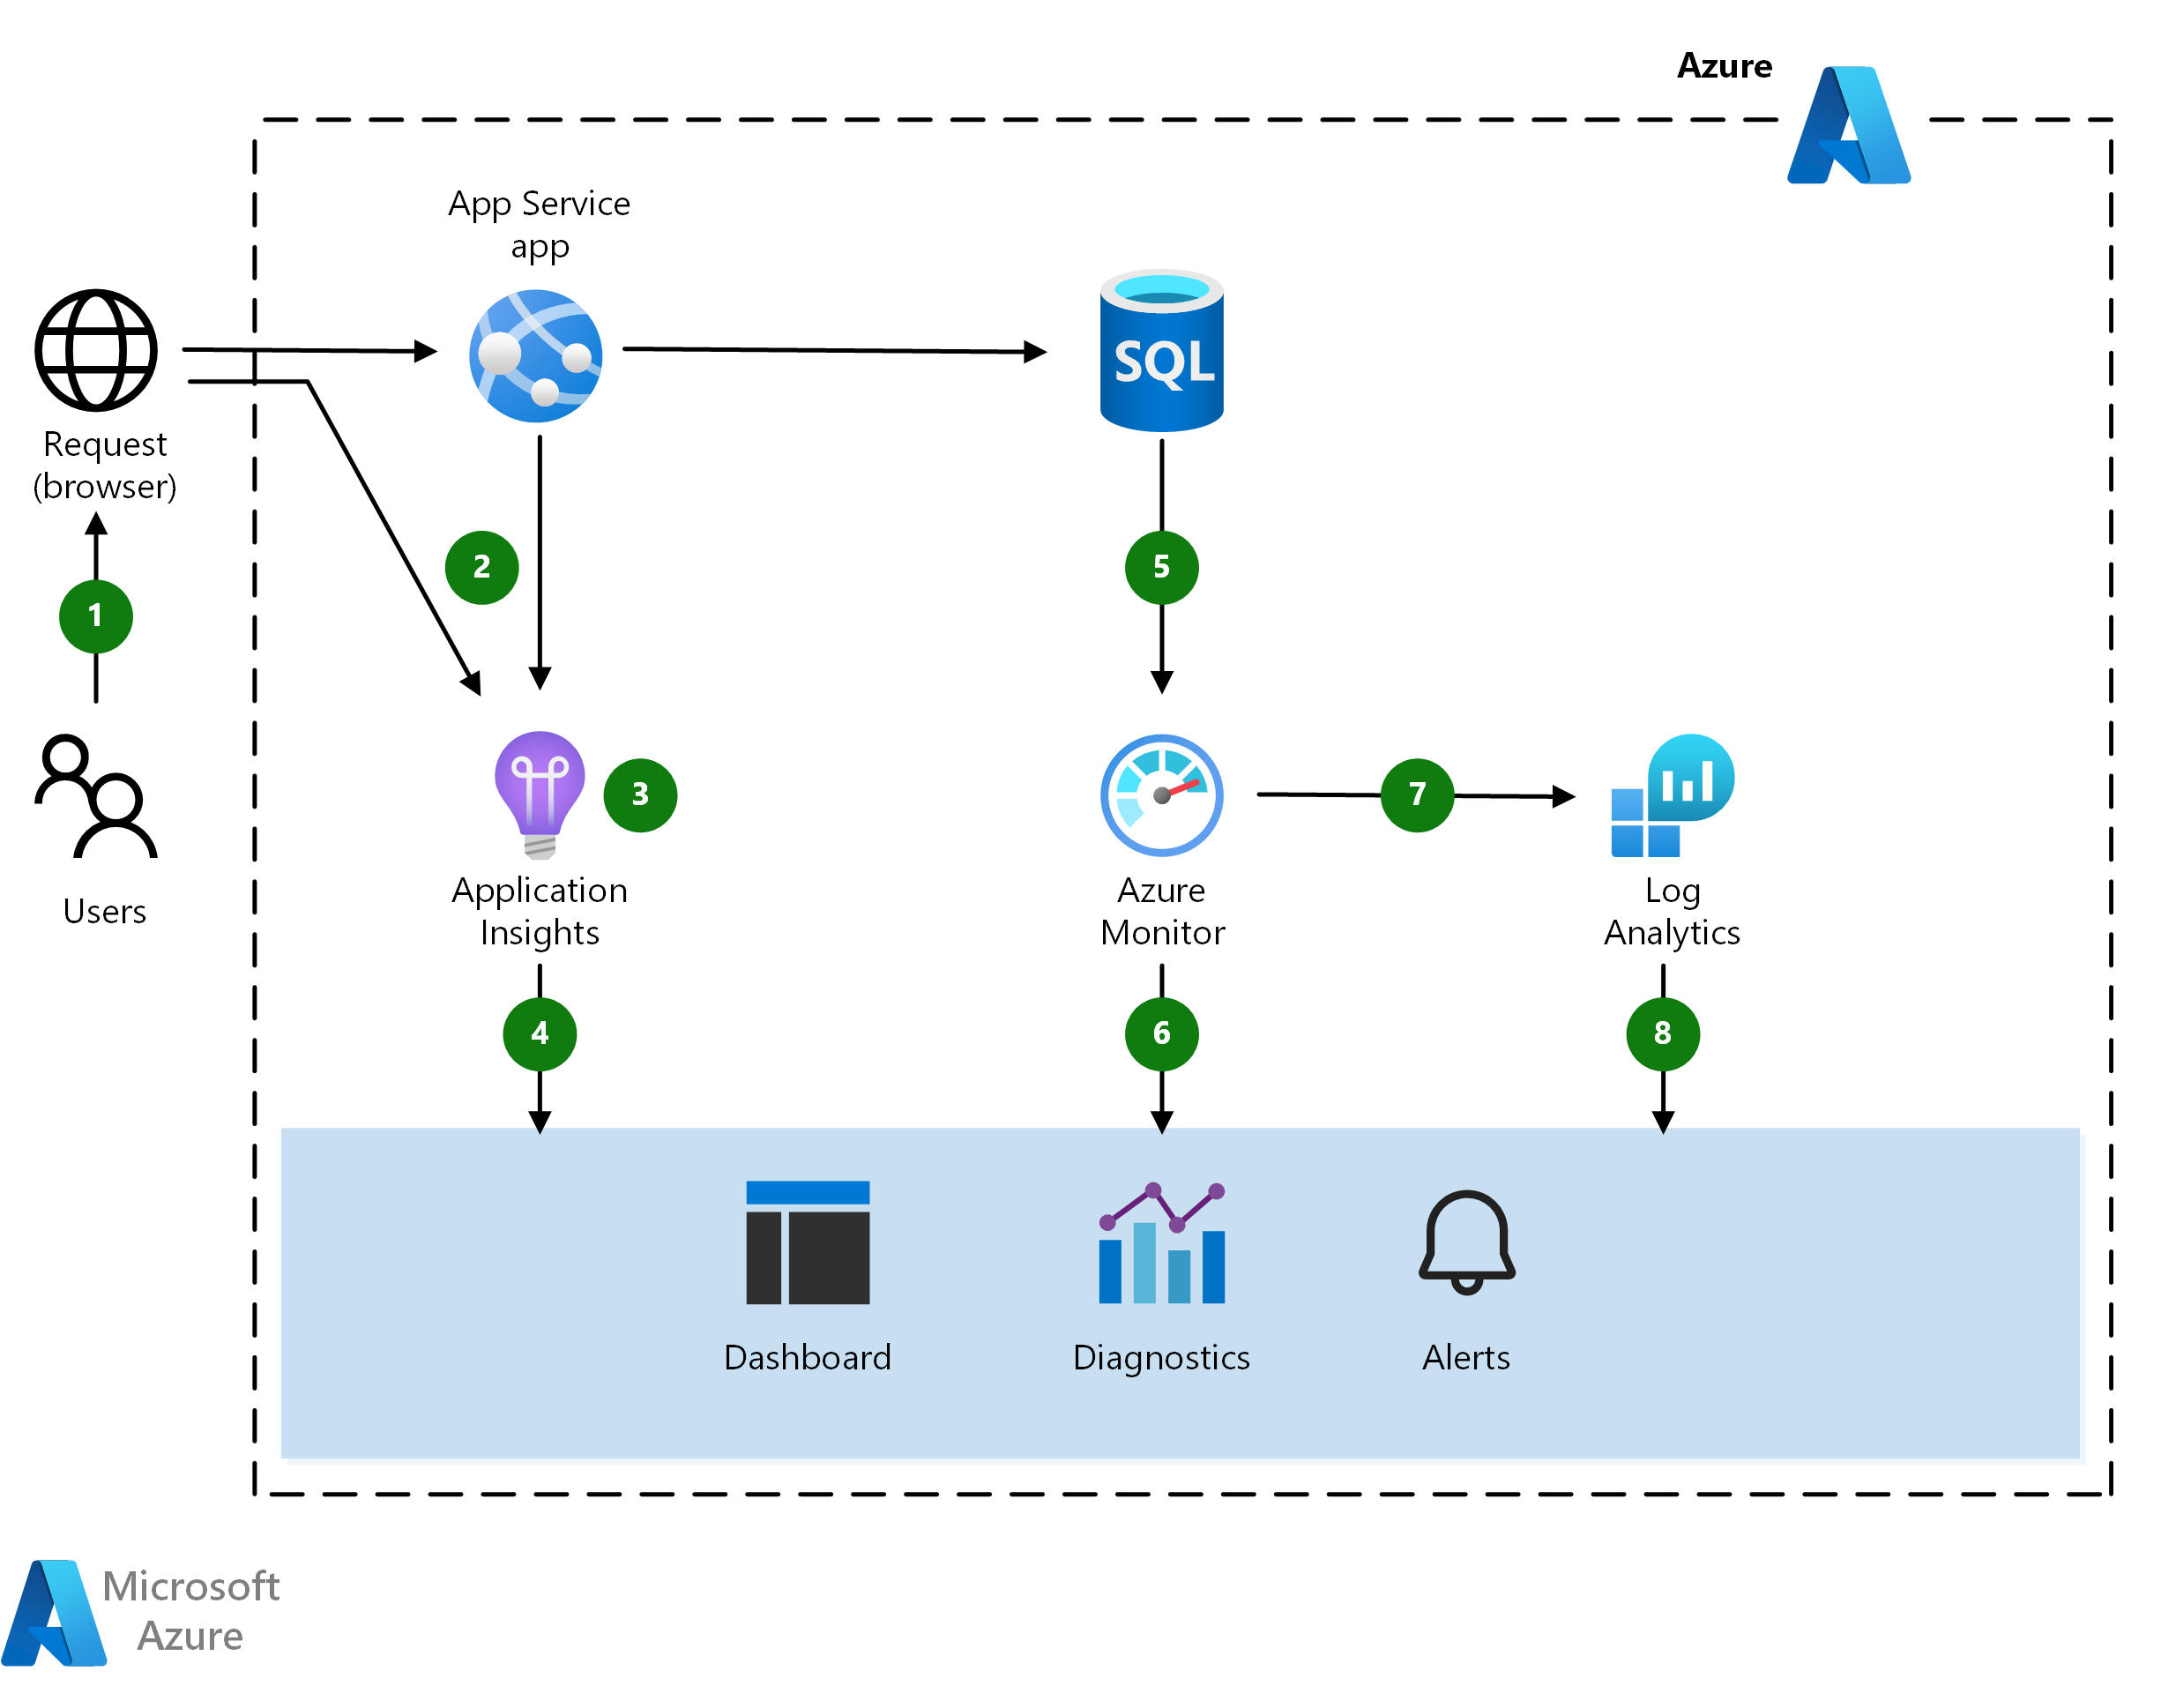 "Diagram demonstrating the architecture of using Azure's PaaS services to monitor your application."